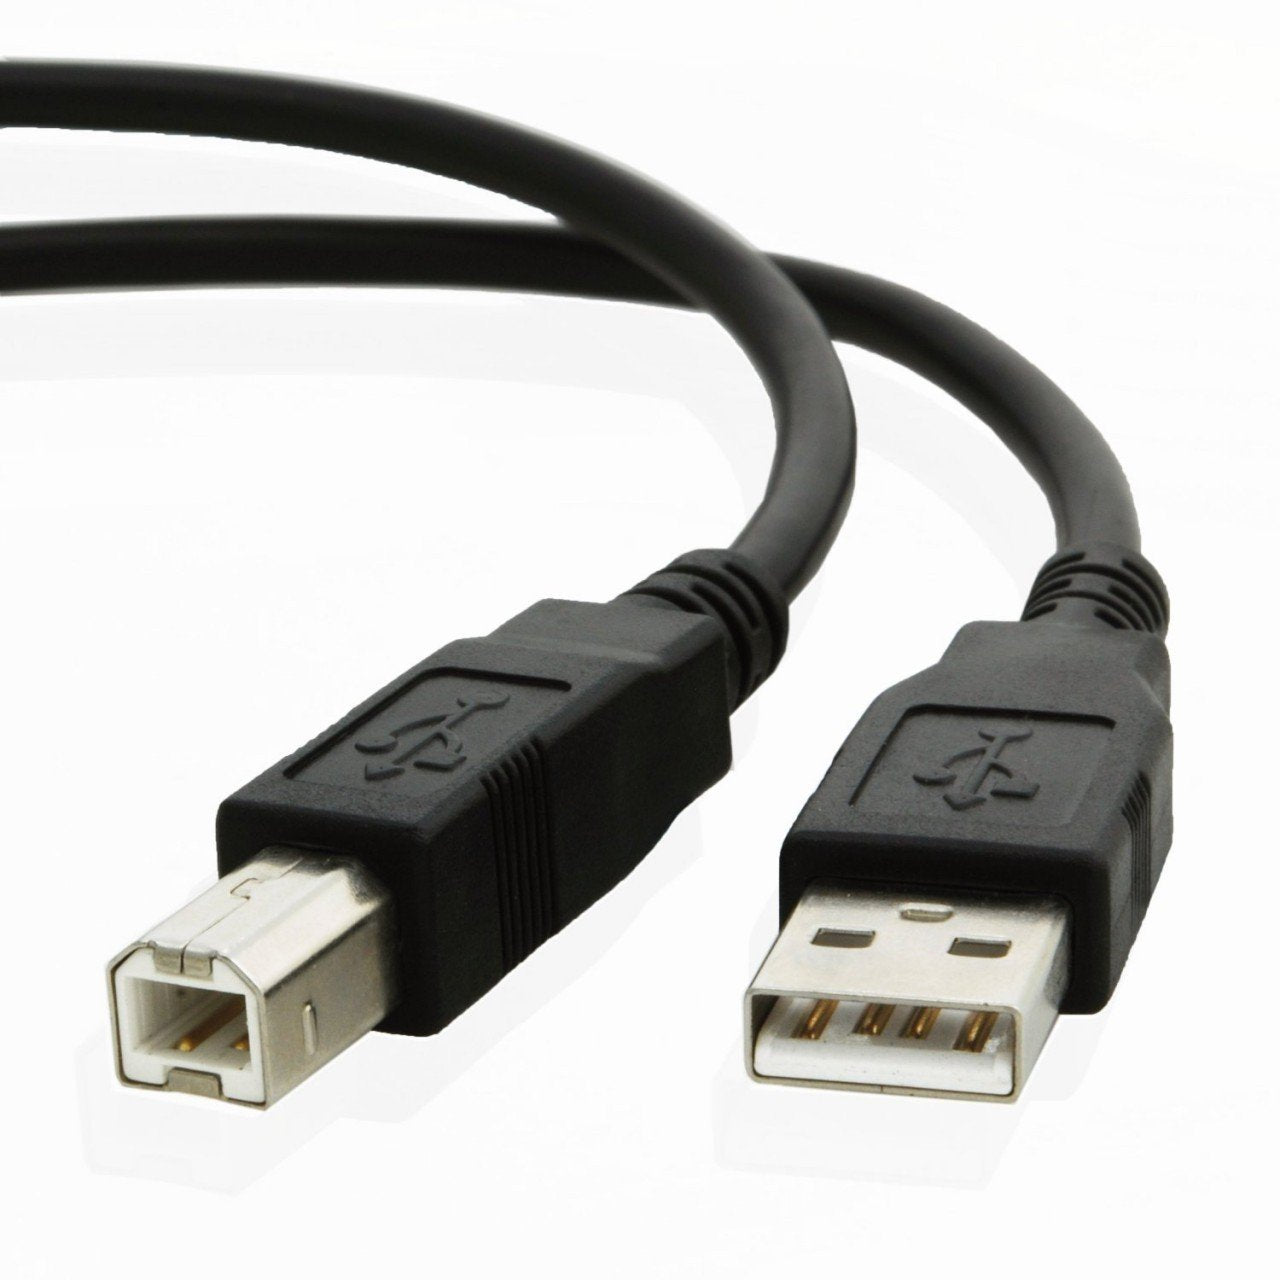 USB cable for Canon IMAGEFORMULA DR-C225